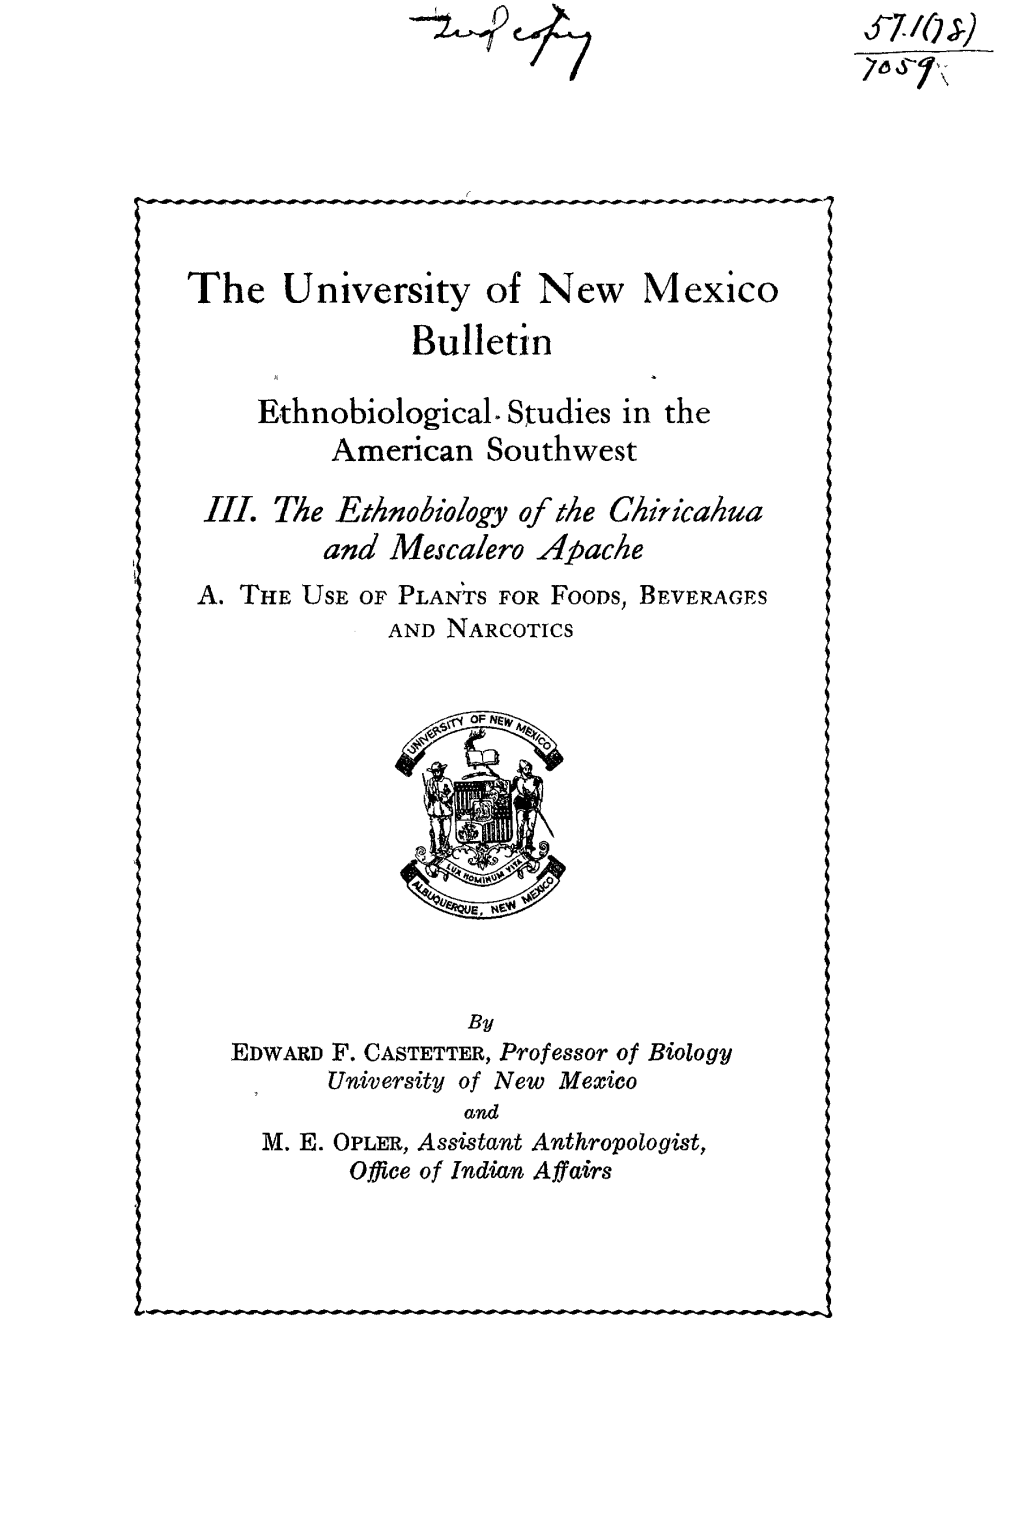 Castetter-Ethnobiology-Of-The-Chiricahua-And-Mescalero-Apache